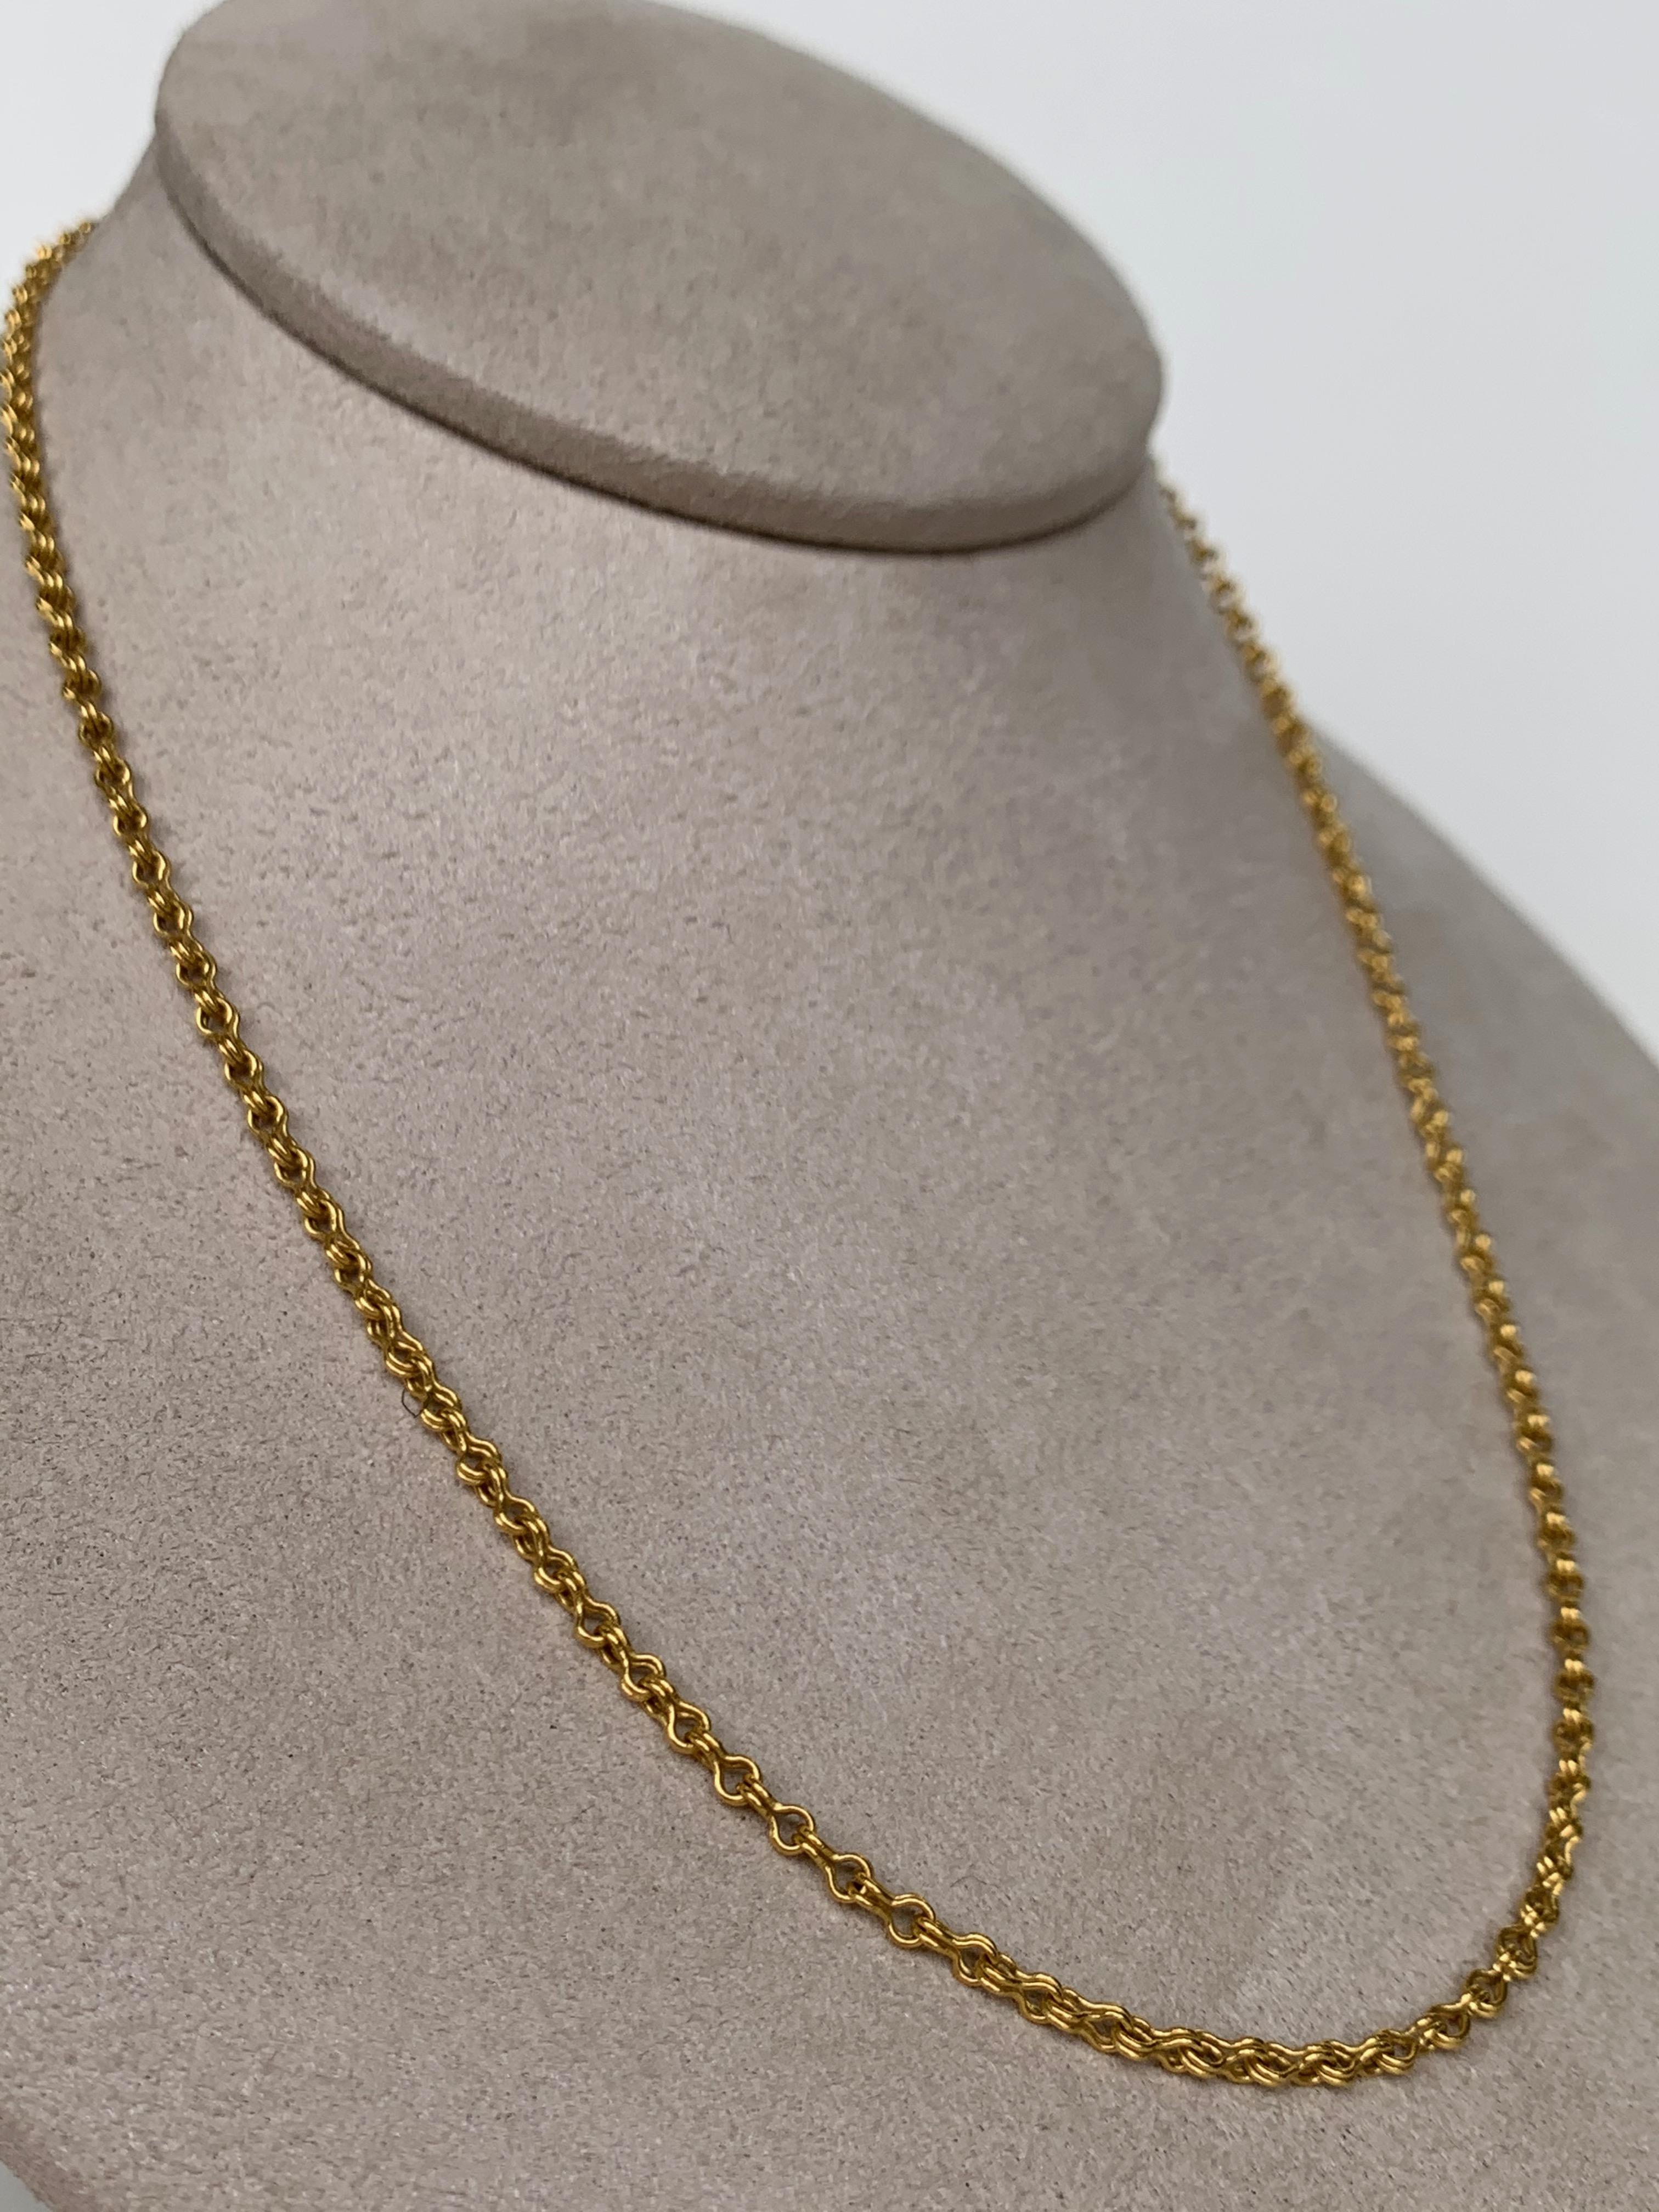 22 karat gold chain with toggle clasp. The links are mini sailor's knot, a method that has was used in ancient Egypt. Entirely handcrafted in New York City. 17.5